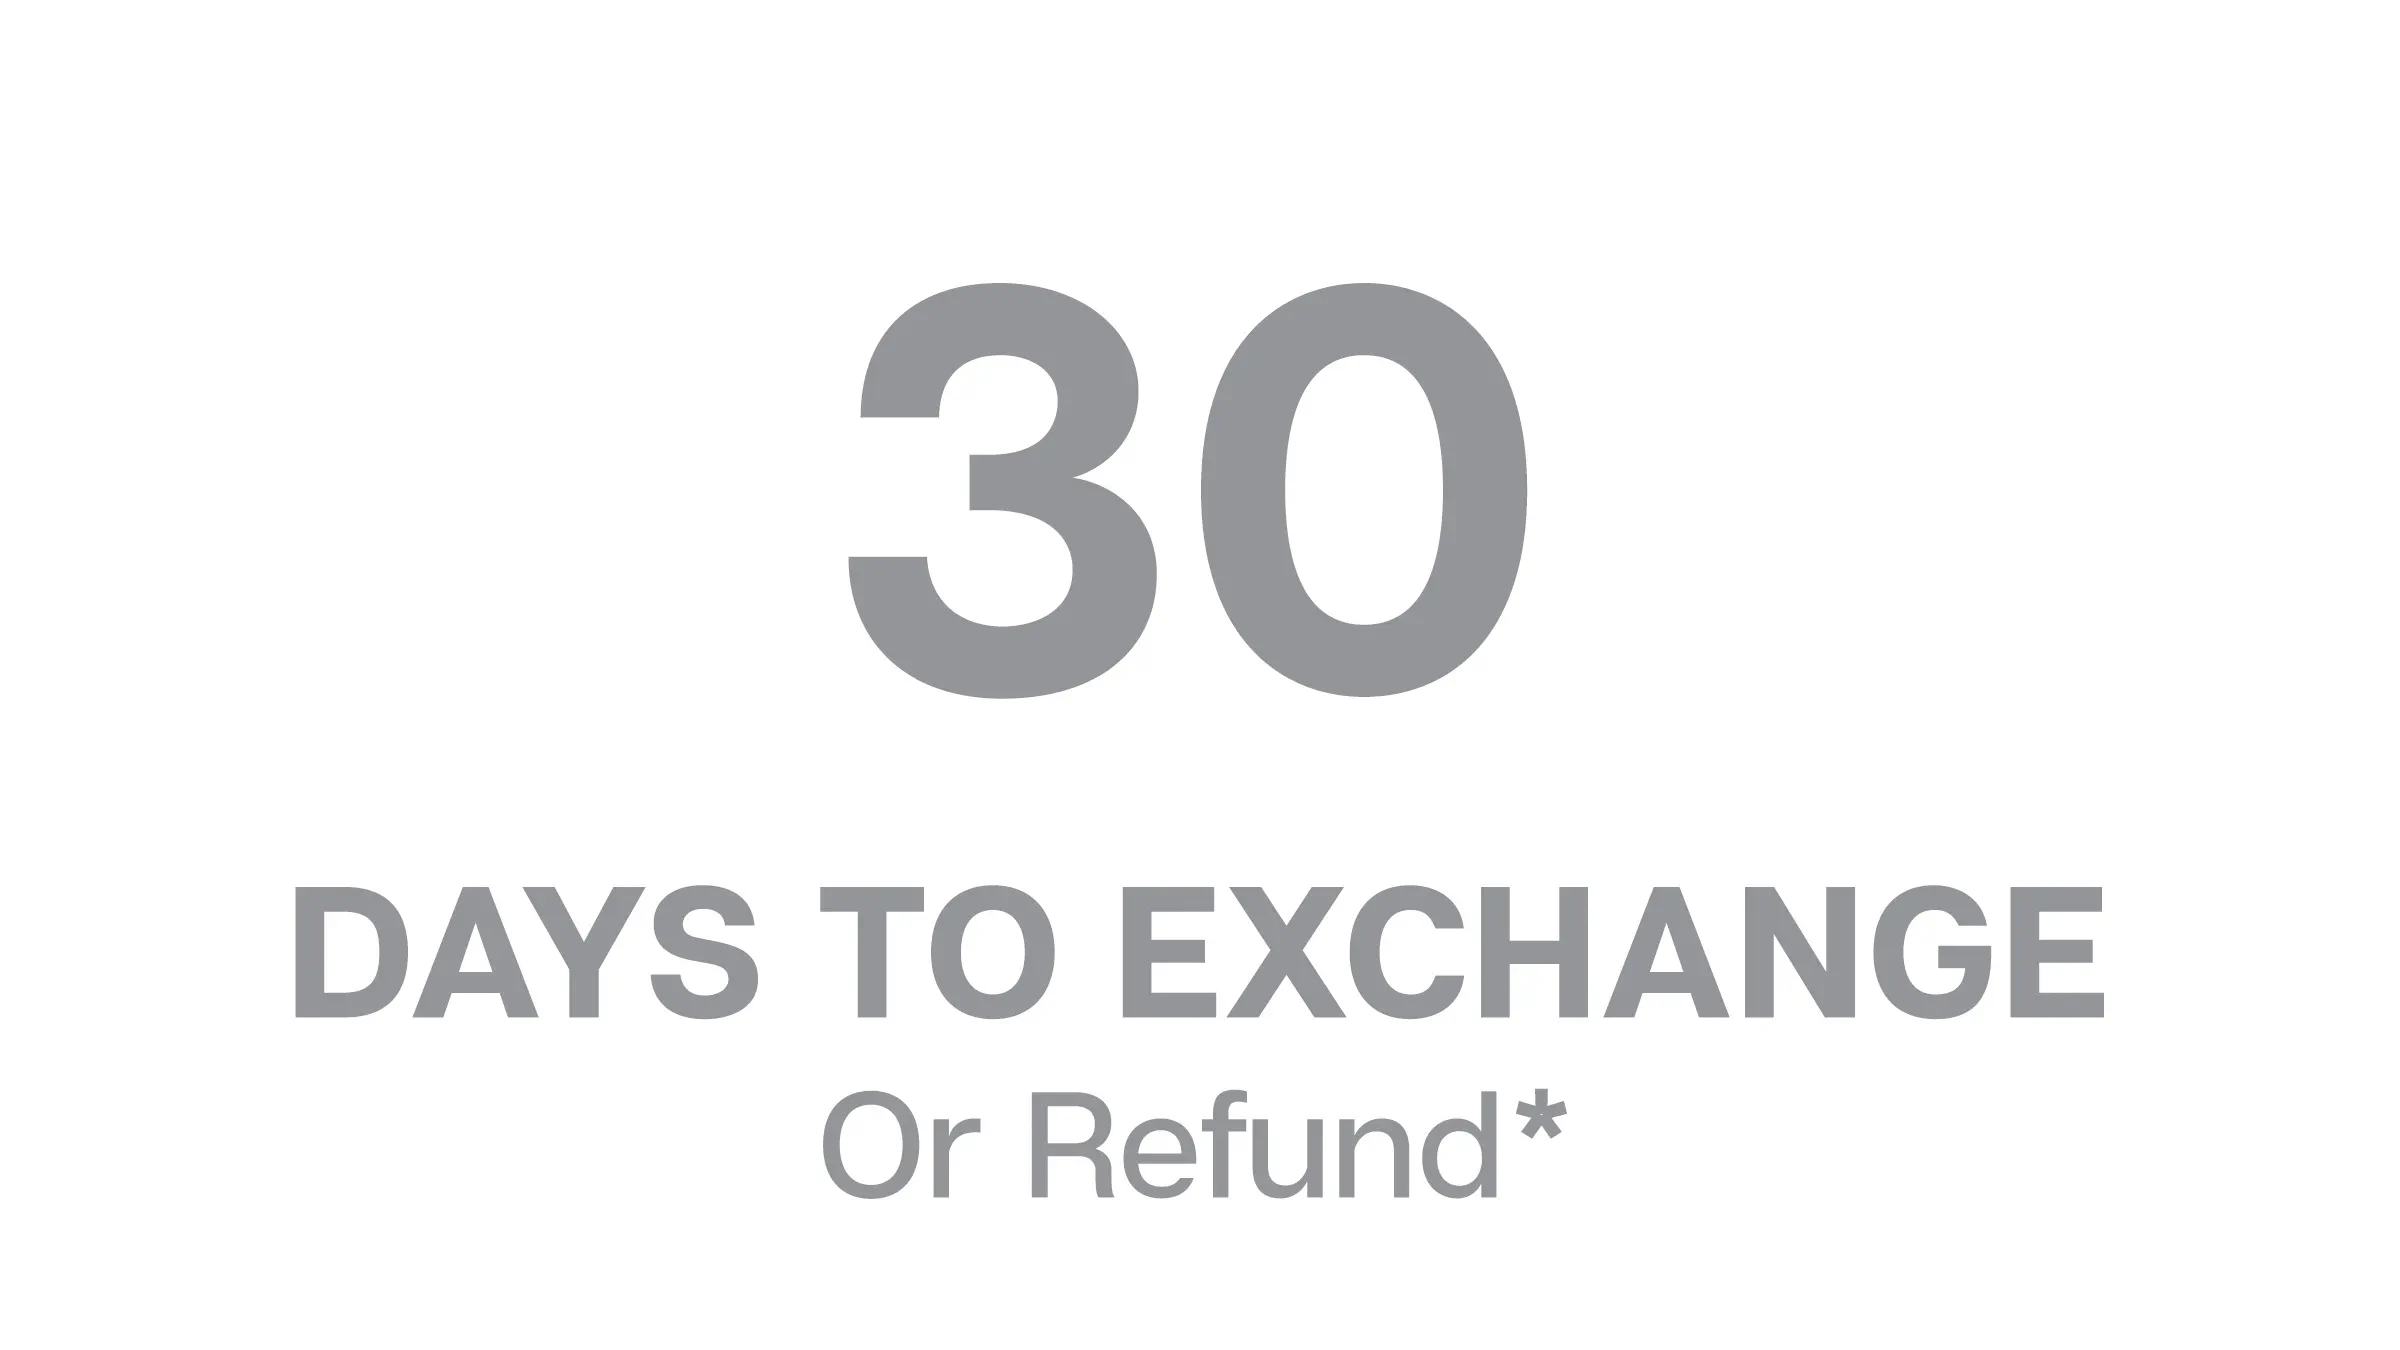 30 Days to Exchange or Refund*